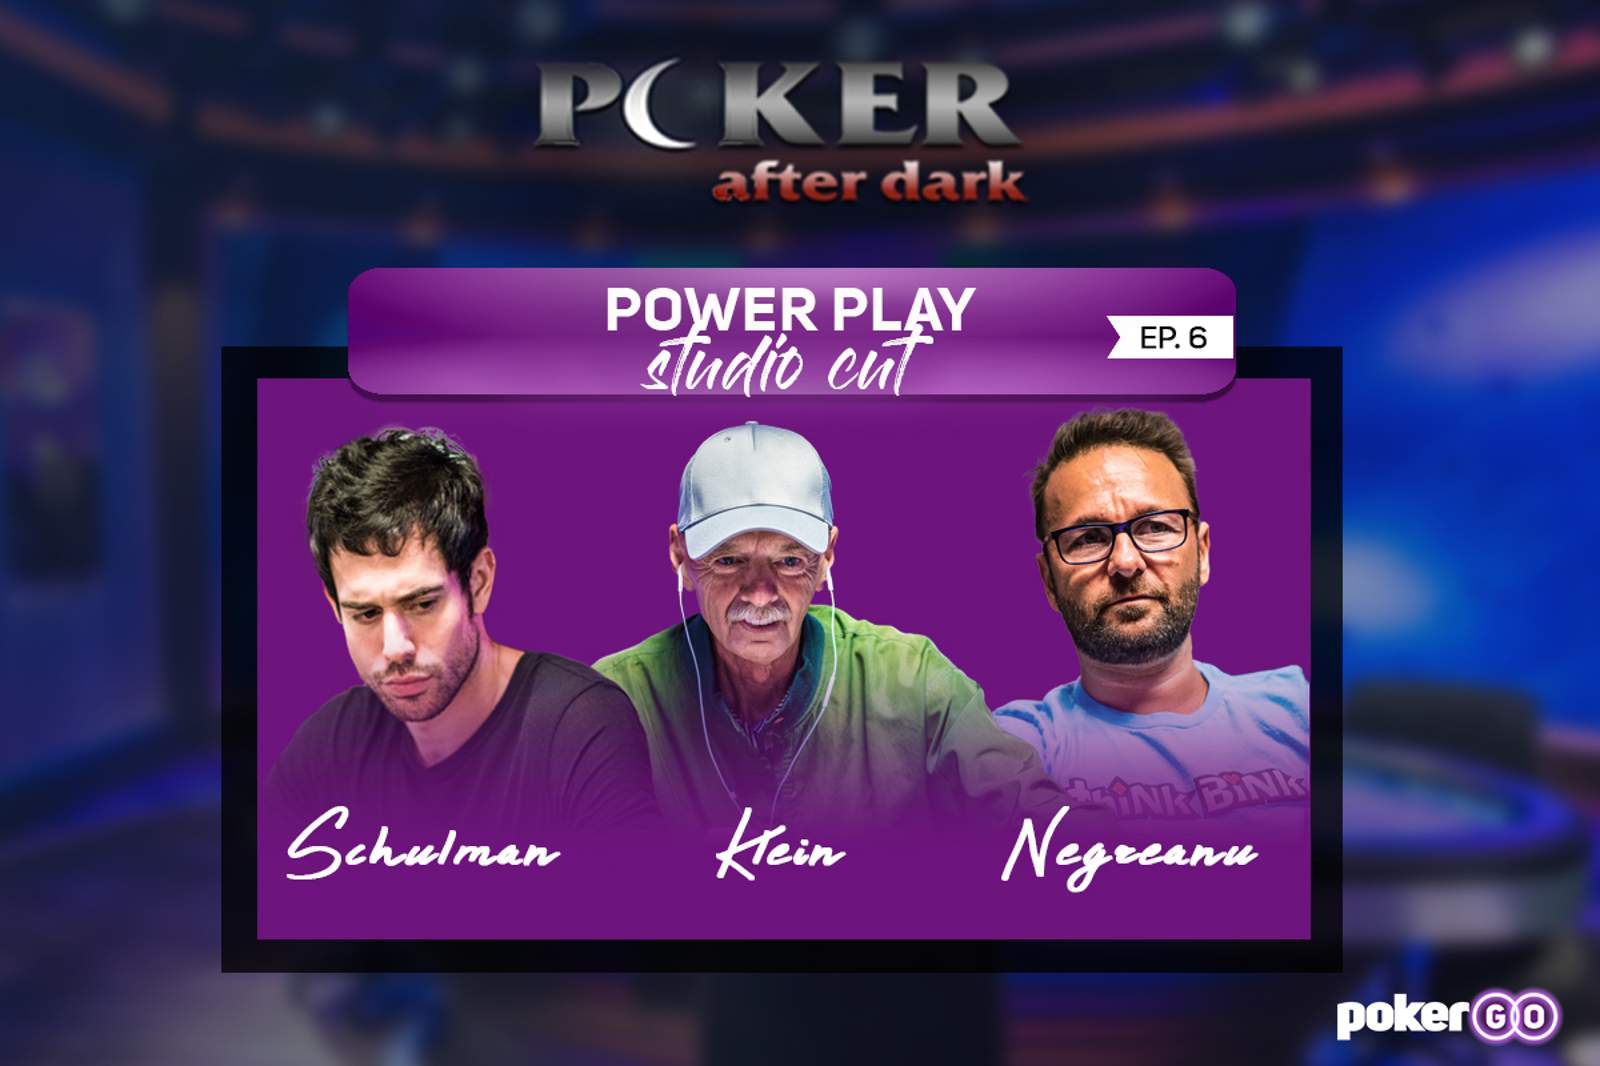 Poker After Dark Power Play Studio Cut Episode 6 on Tonight at 8 p.m. ET